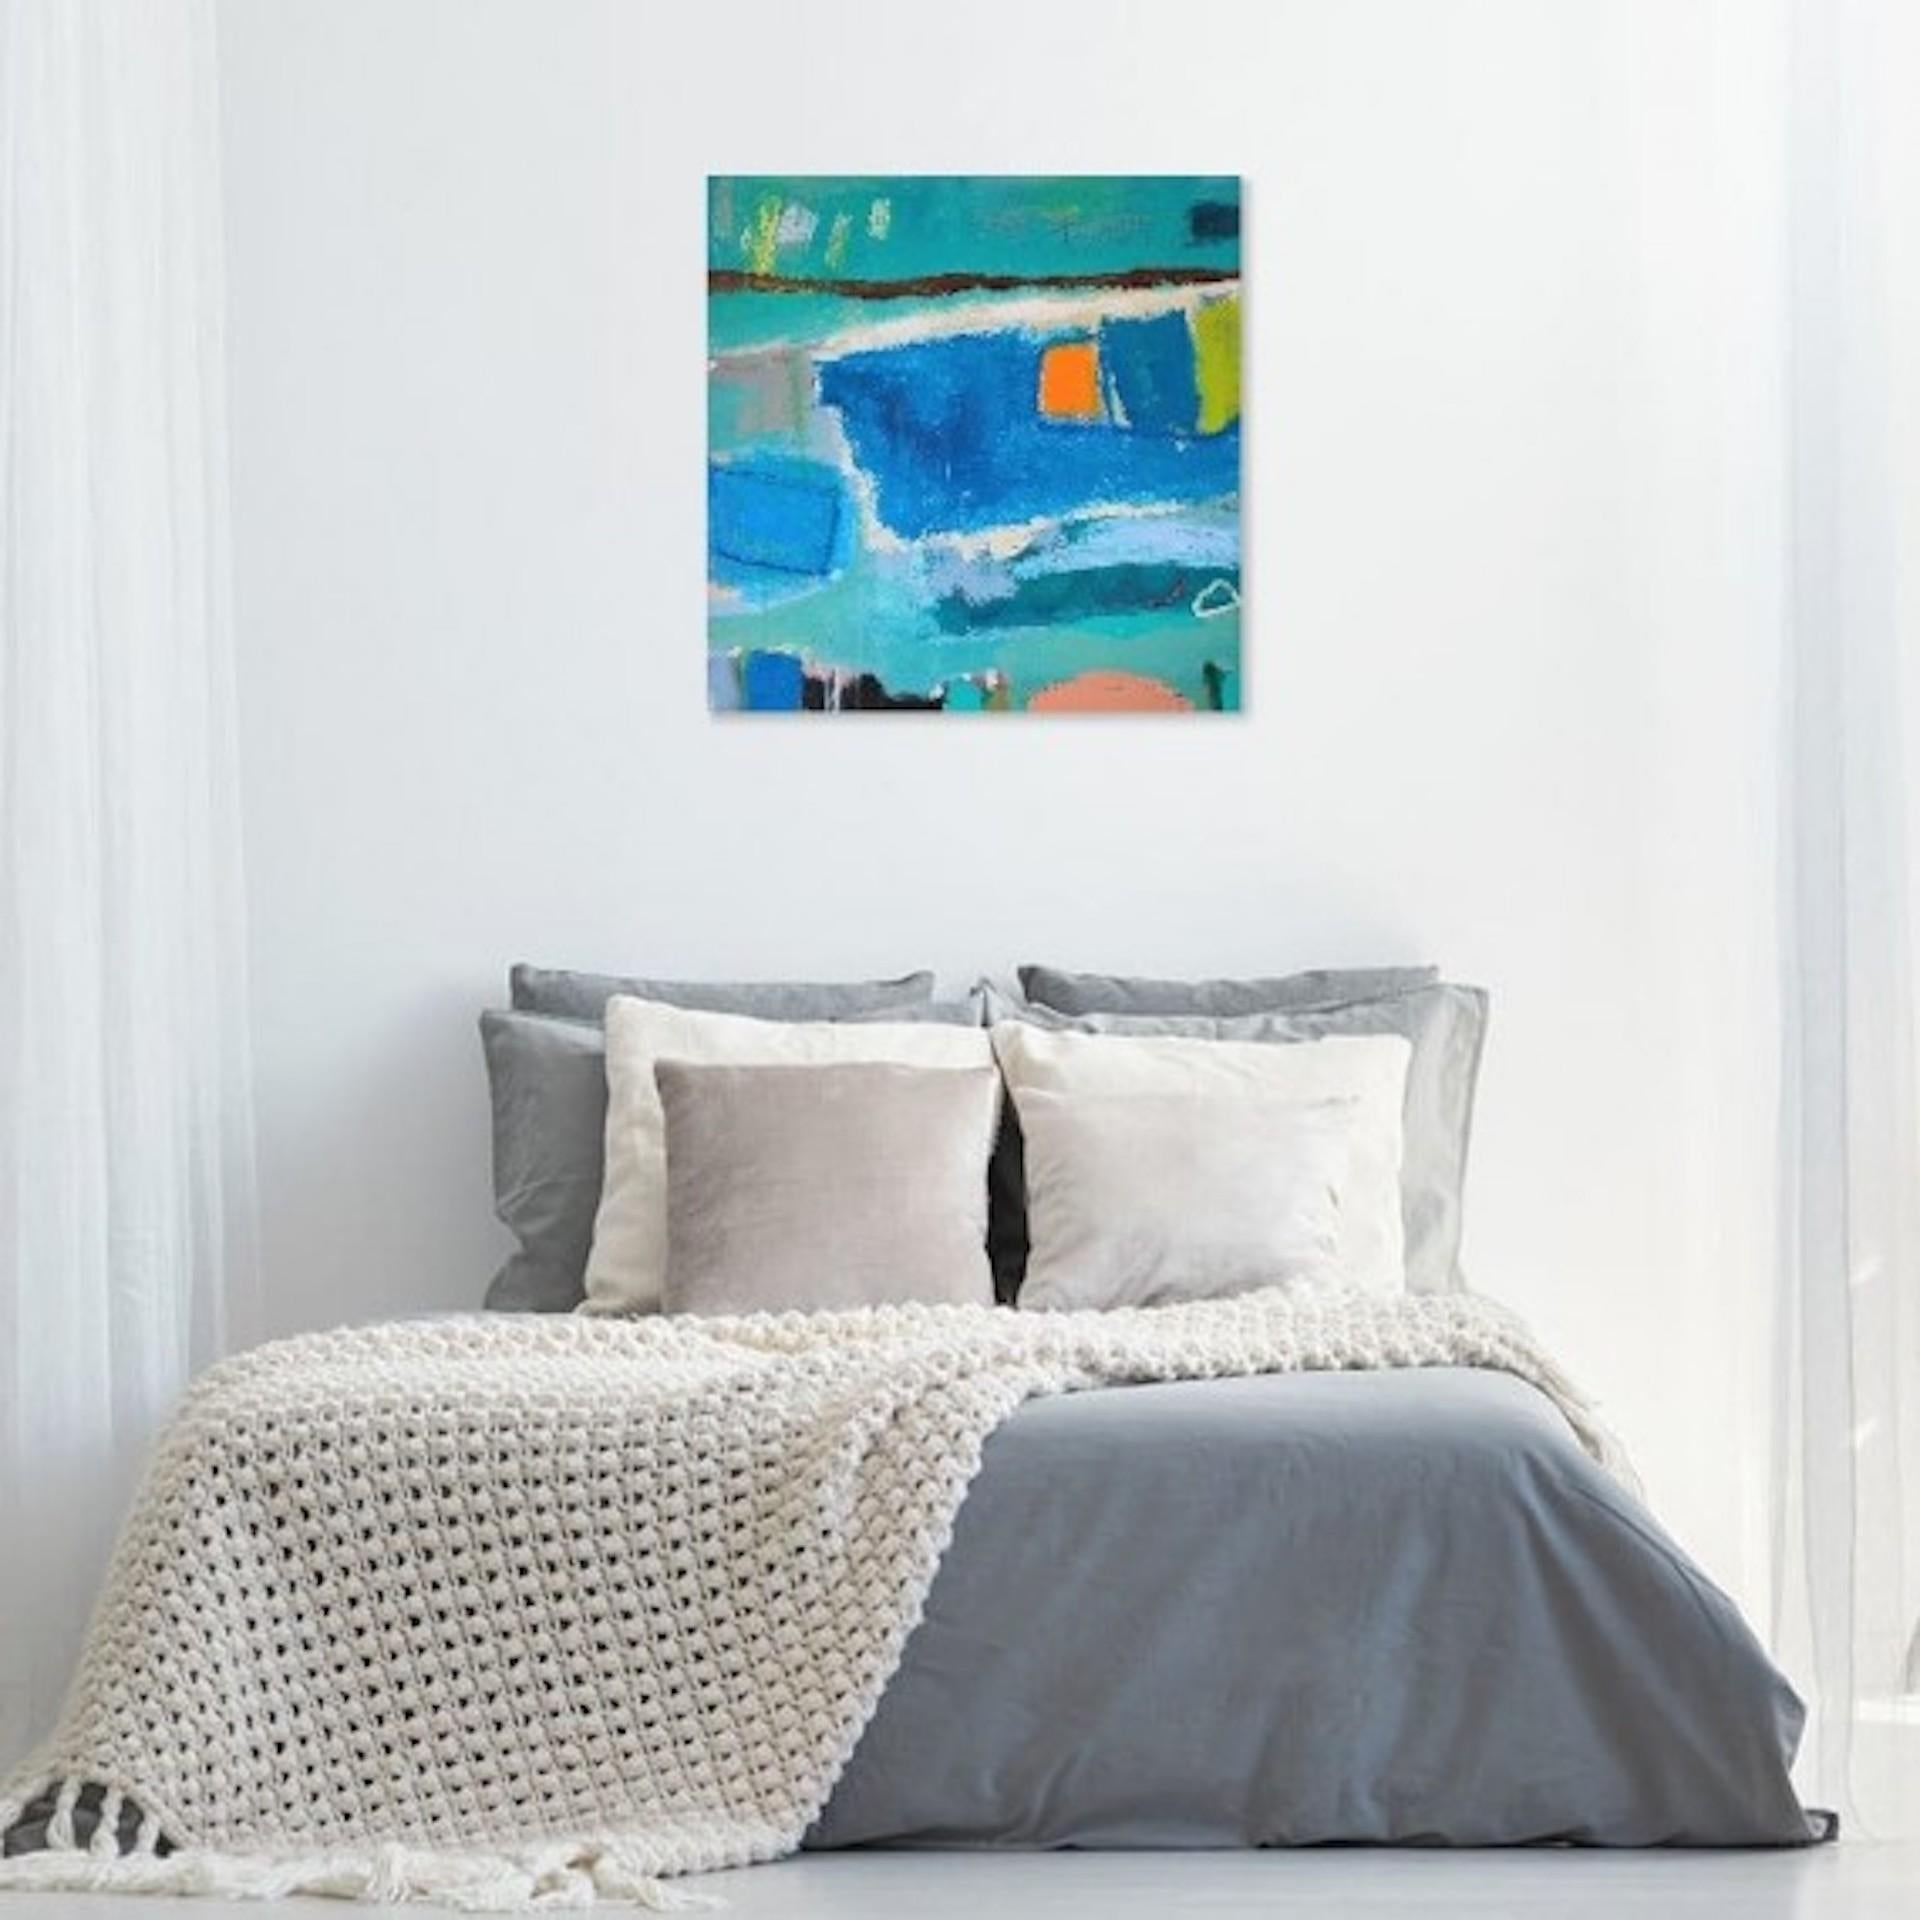 Swimming In Blue, Diane Whalley, Original Abstract Painting, Affordable Artwork 6